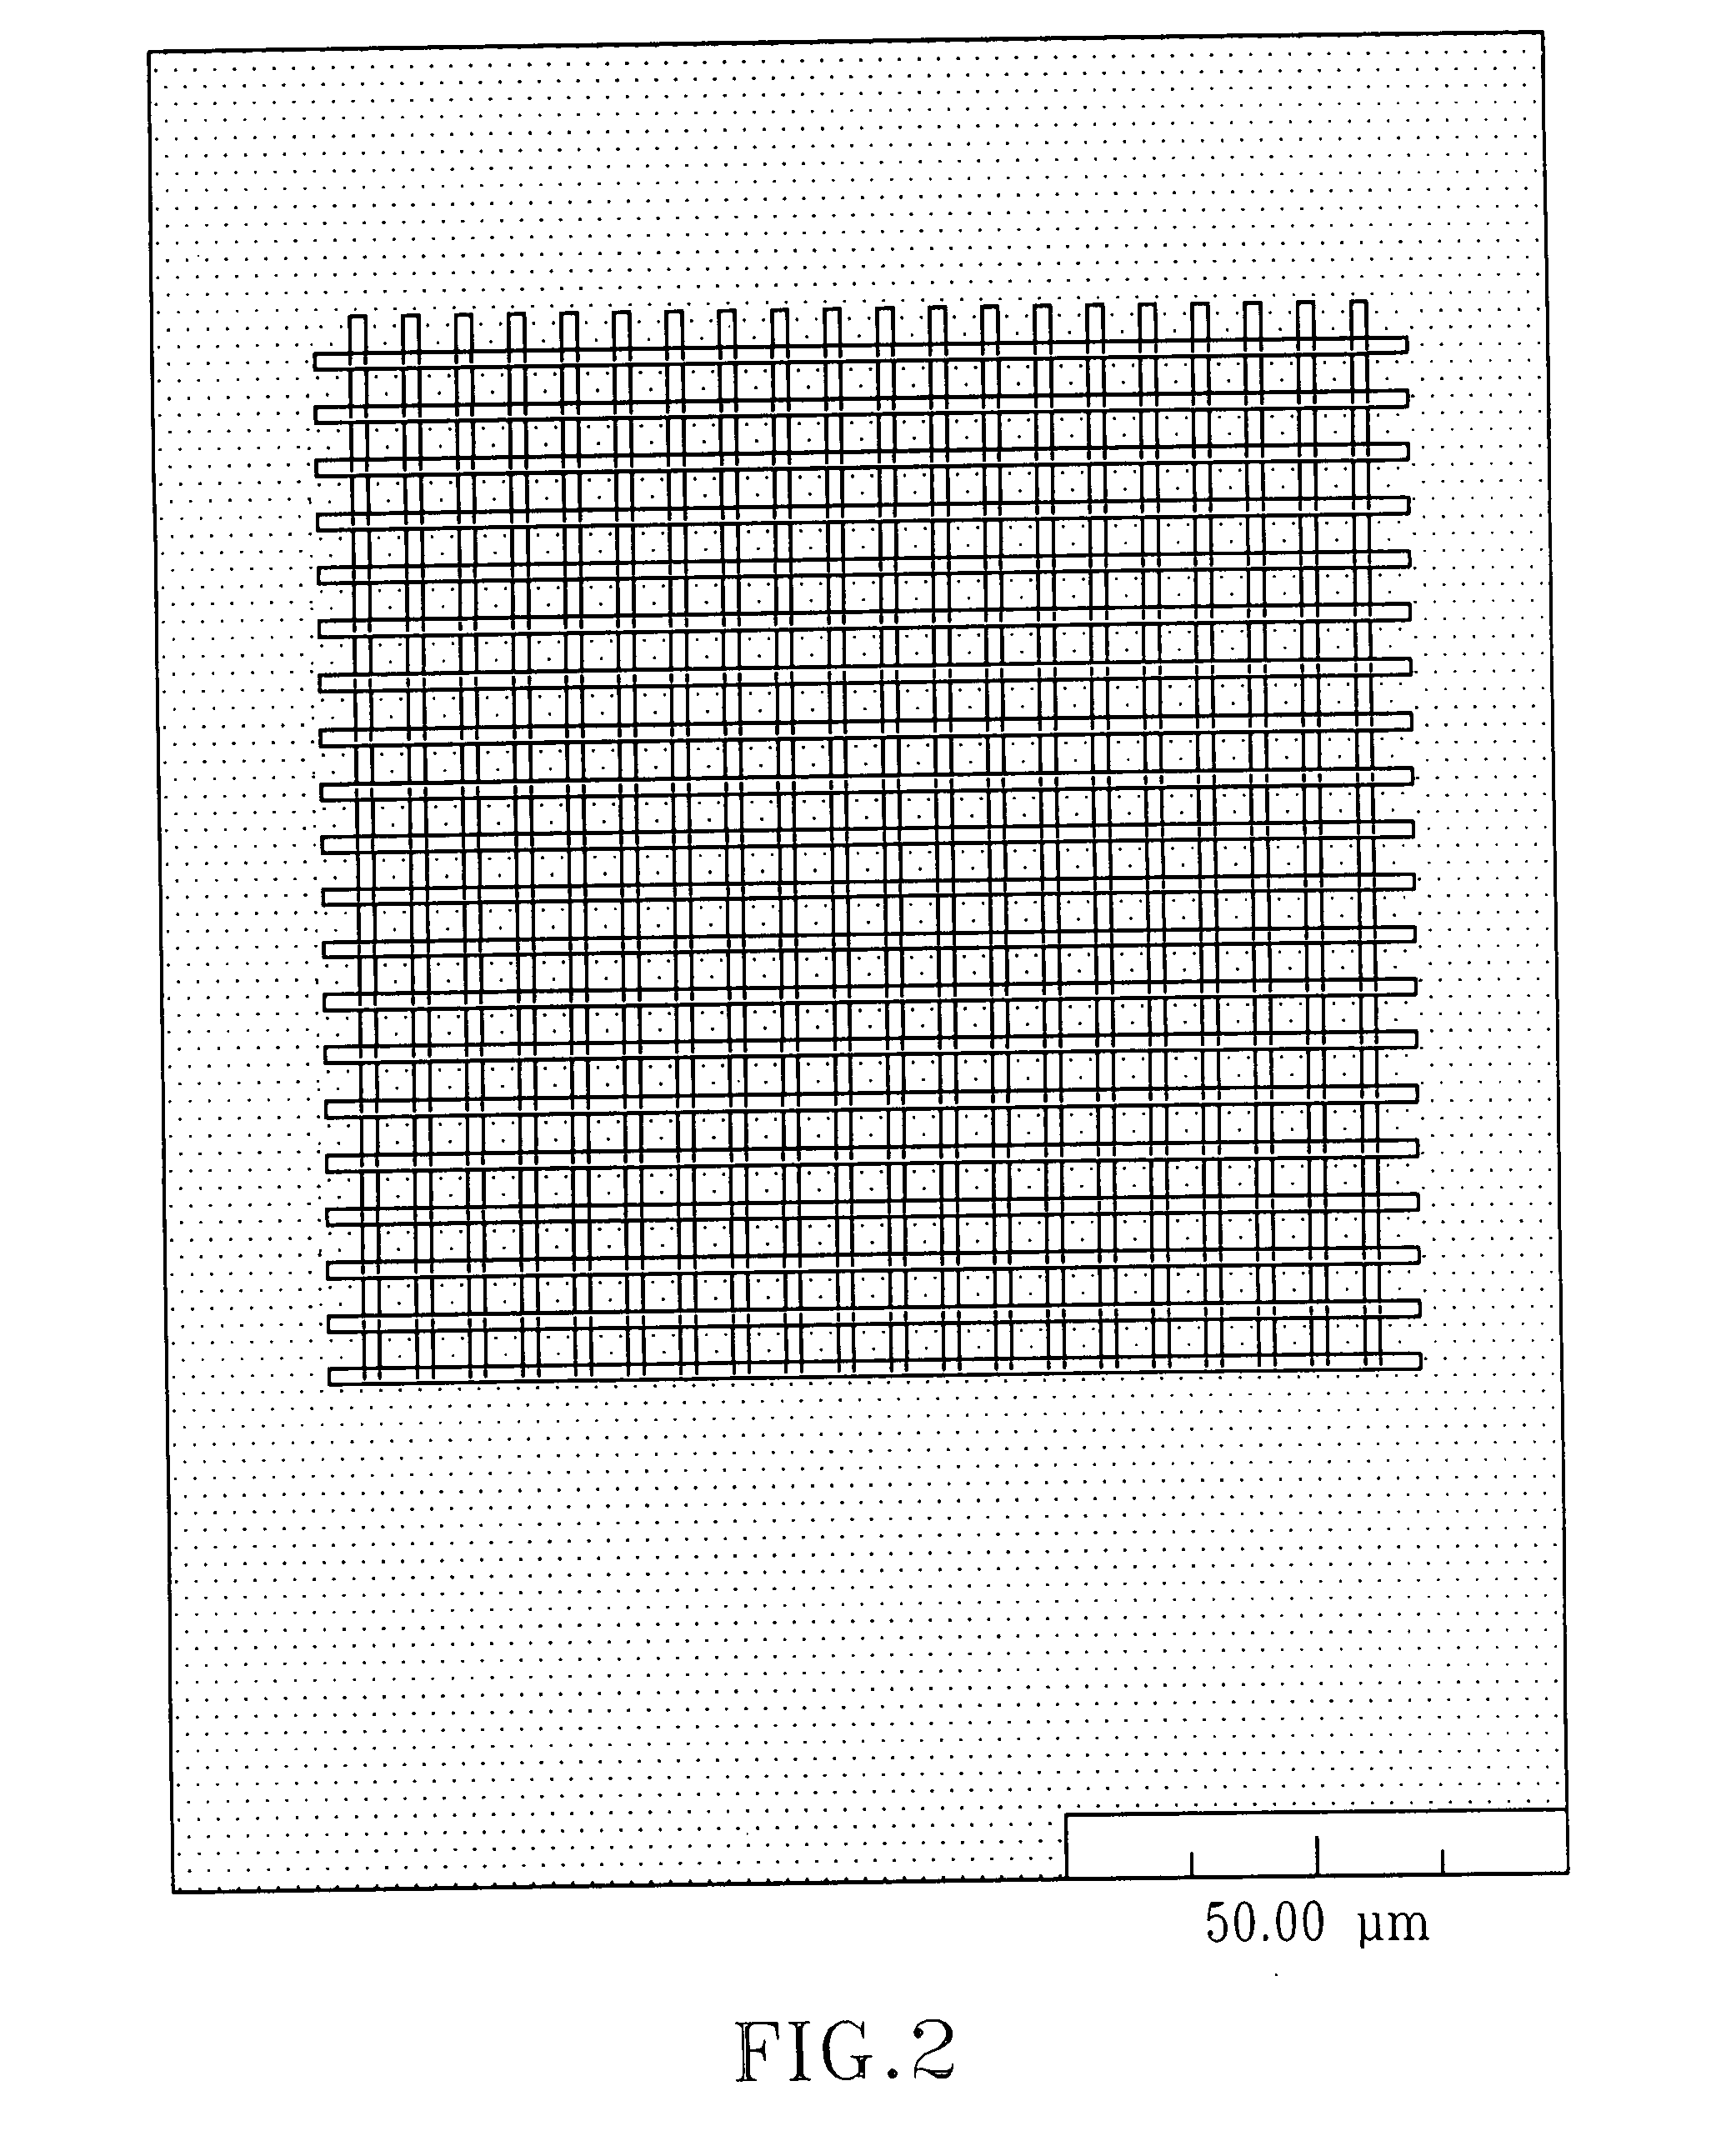 Optical Material and Method for Modifying the Refractive Index